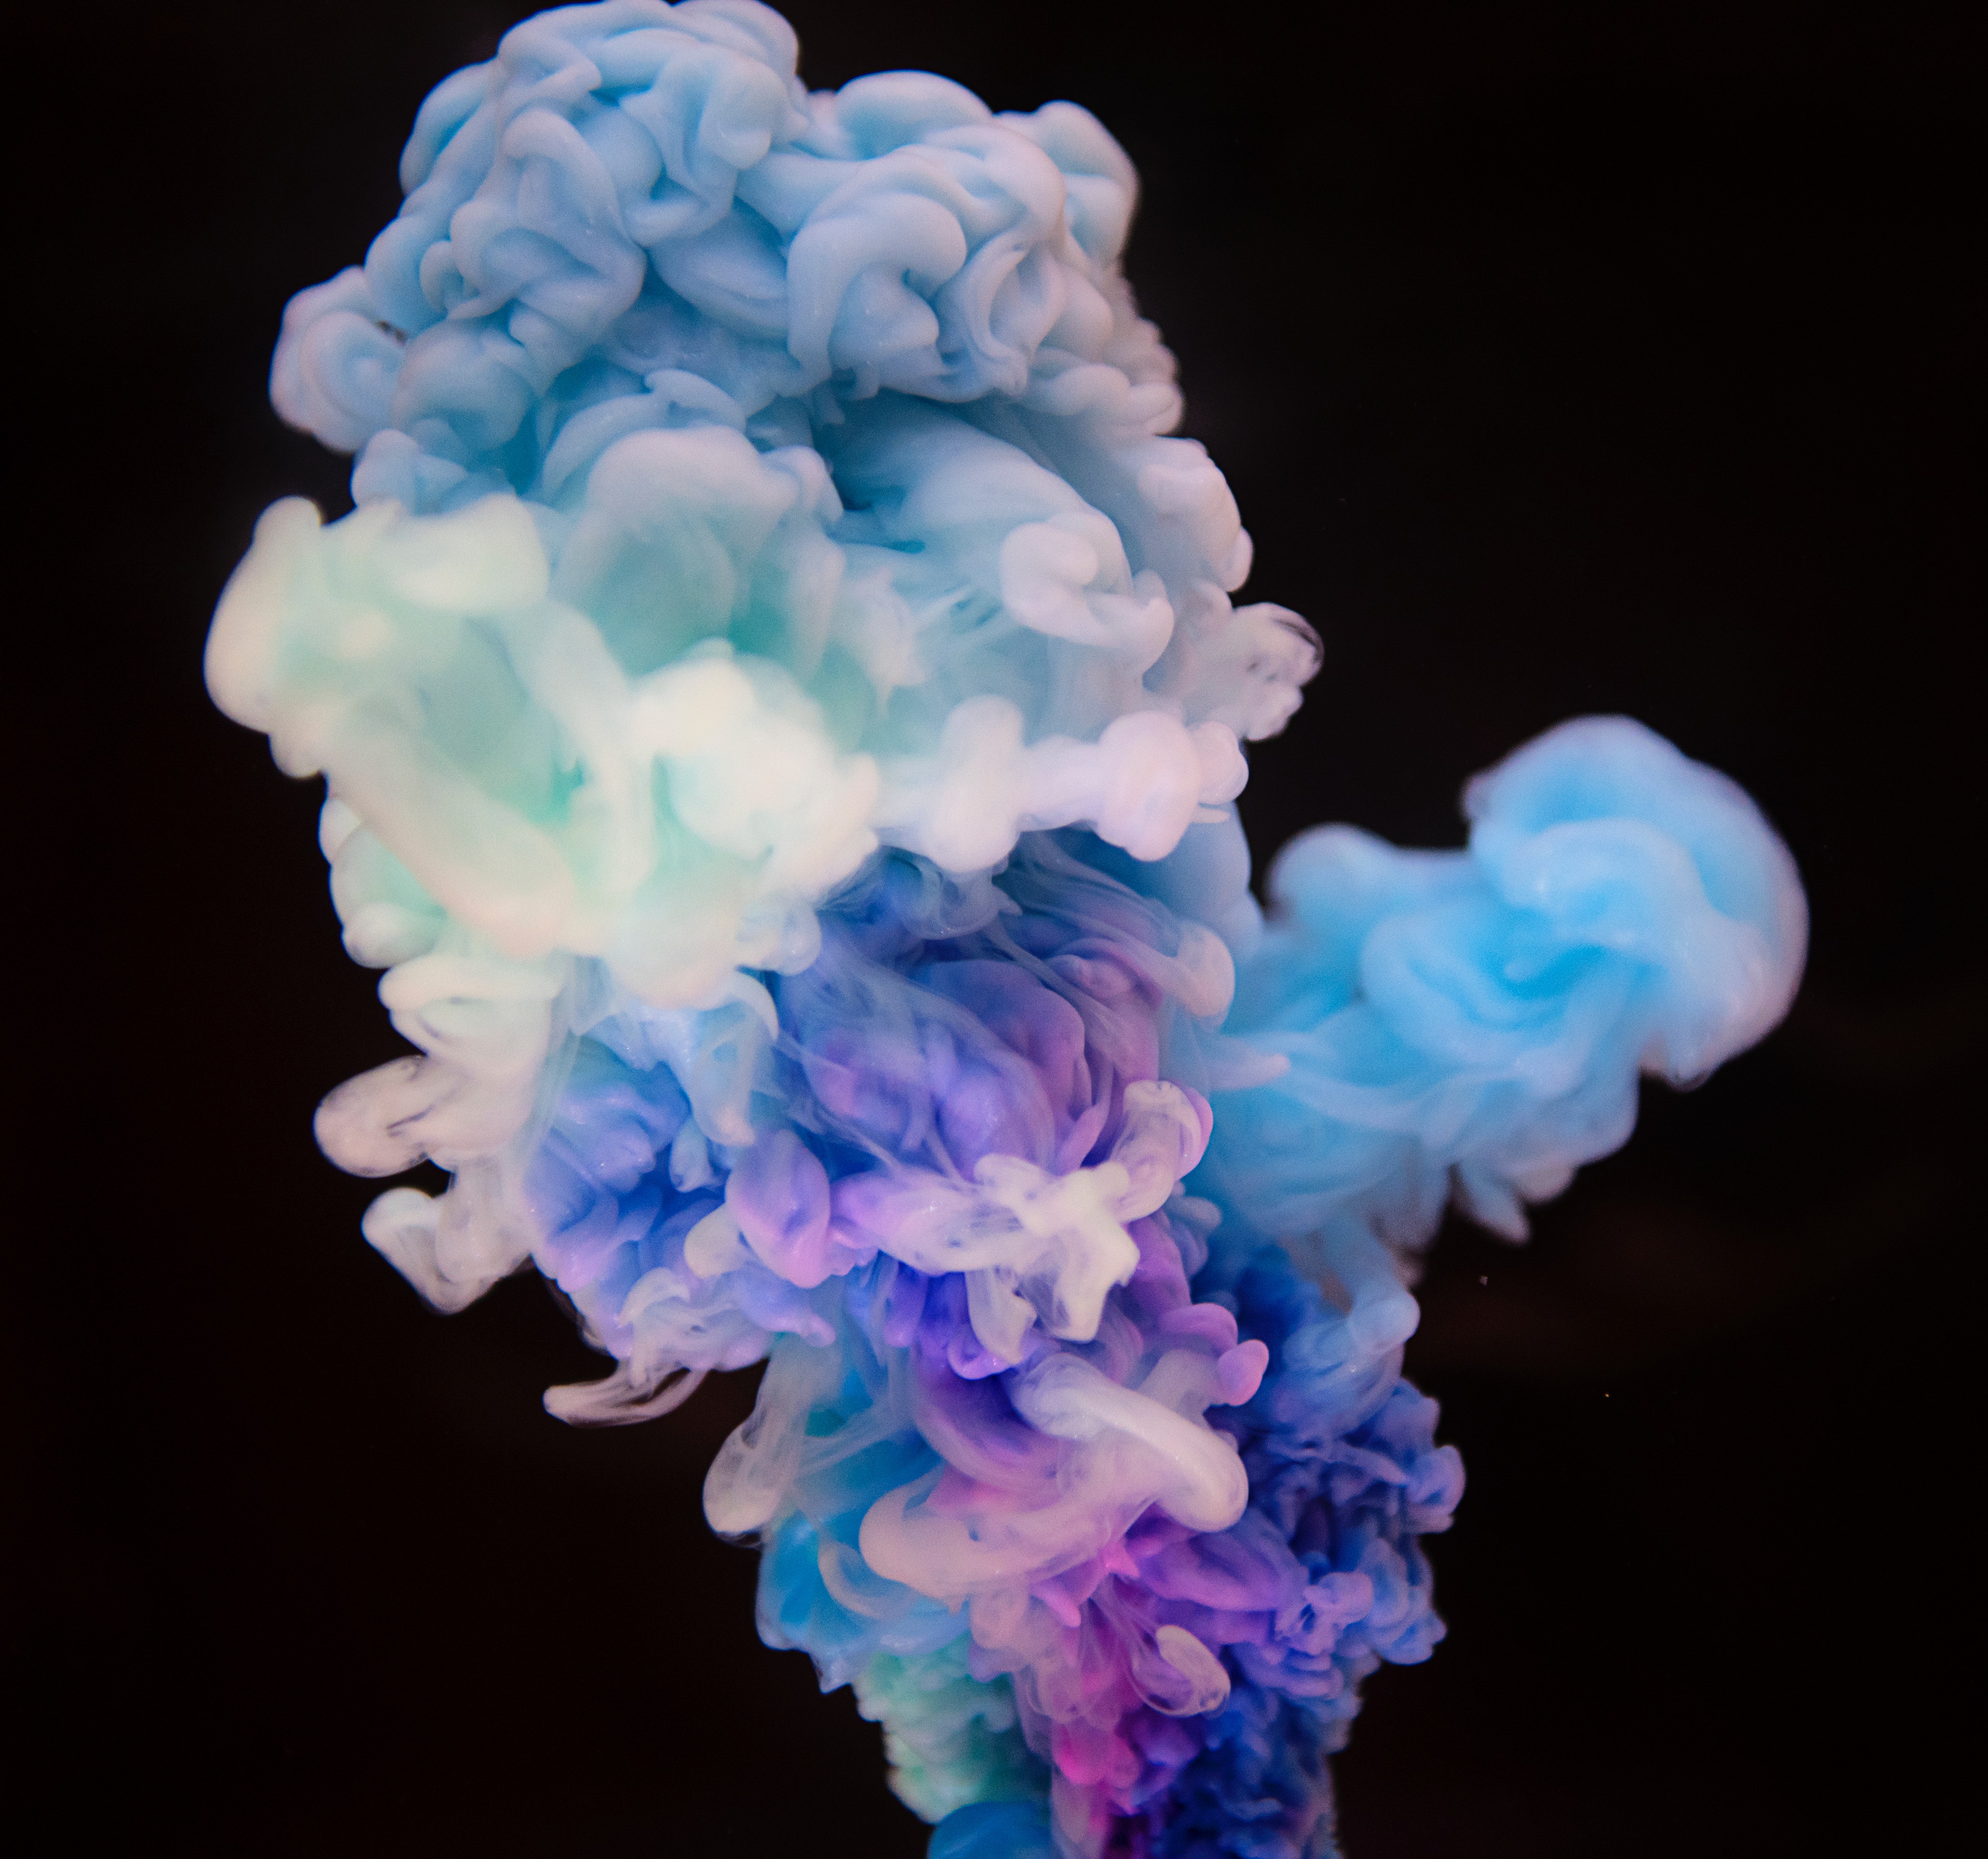 A multicolored smoke bomb set off under water